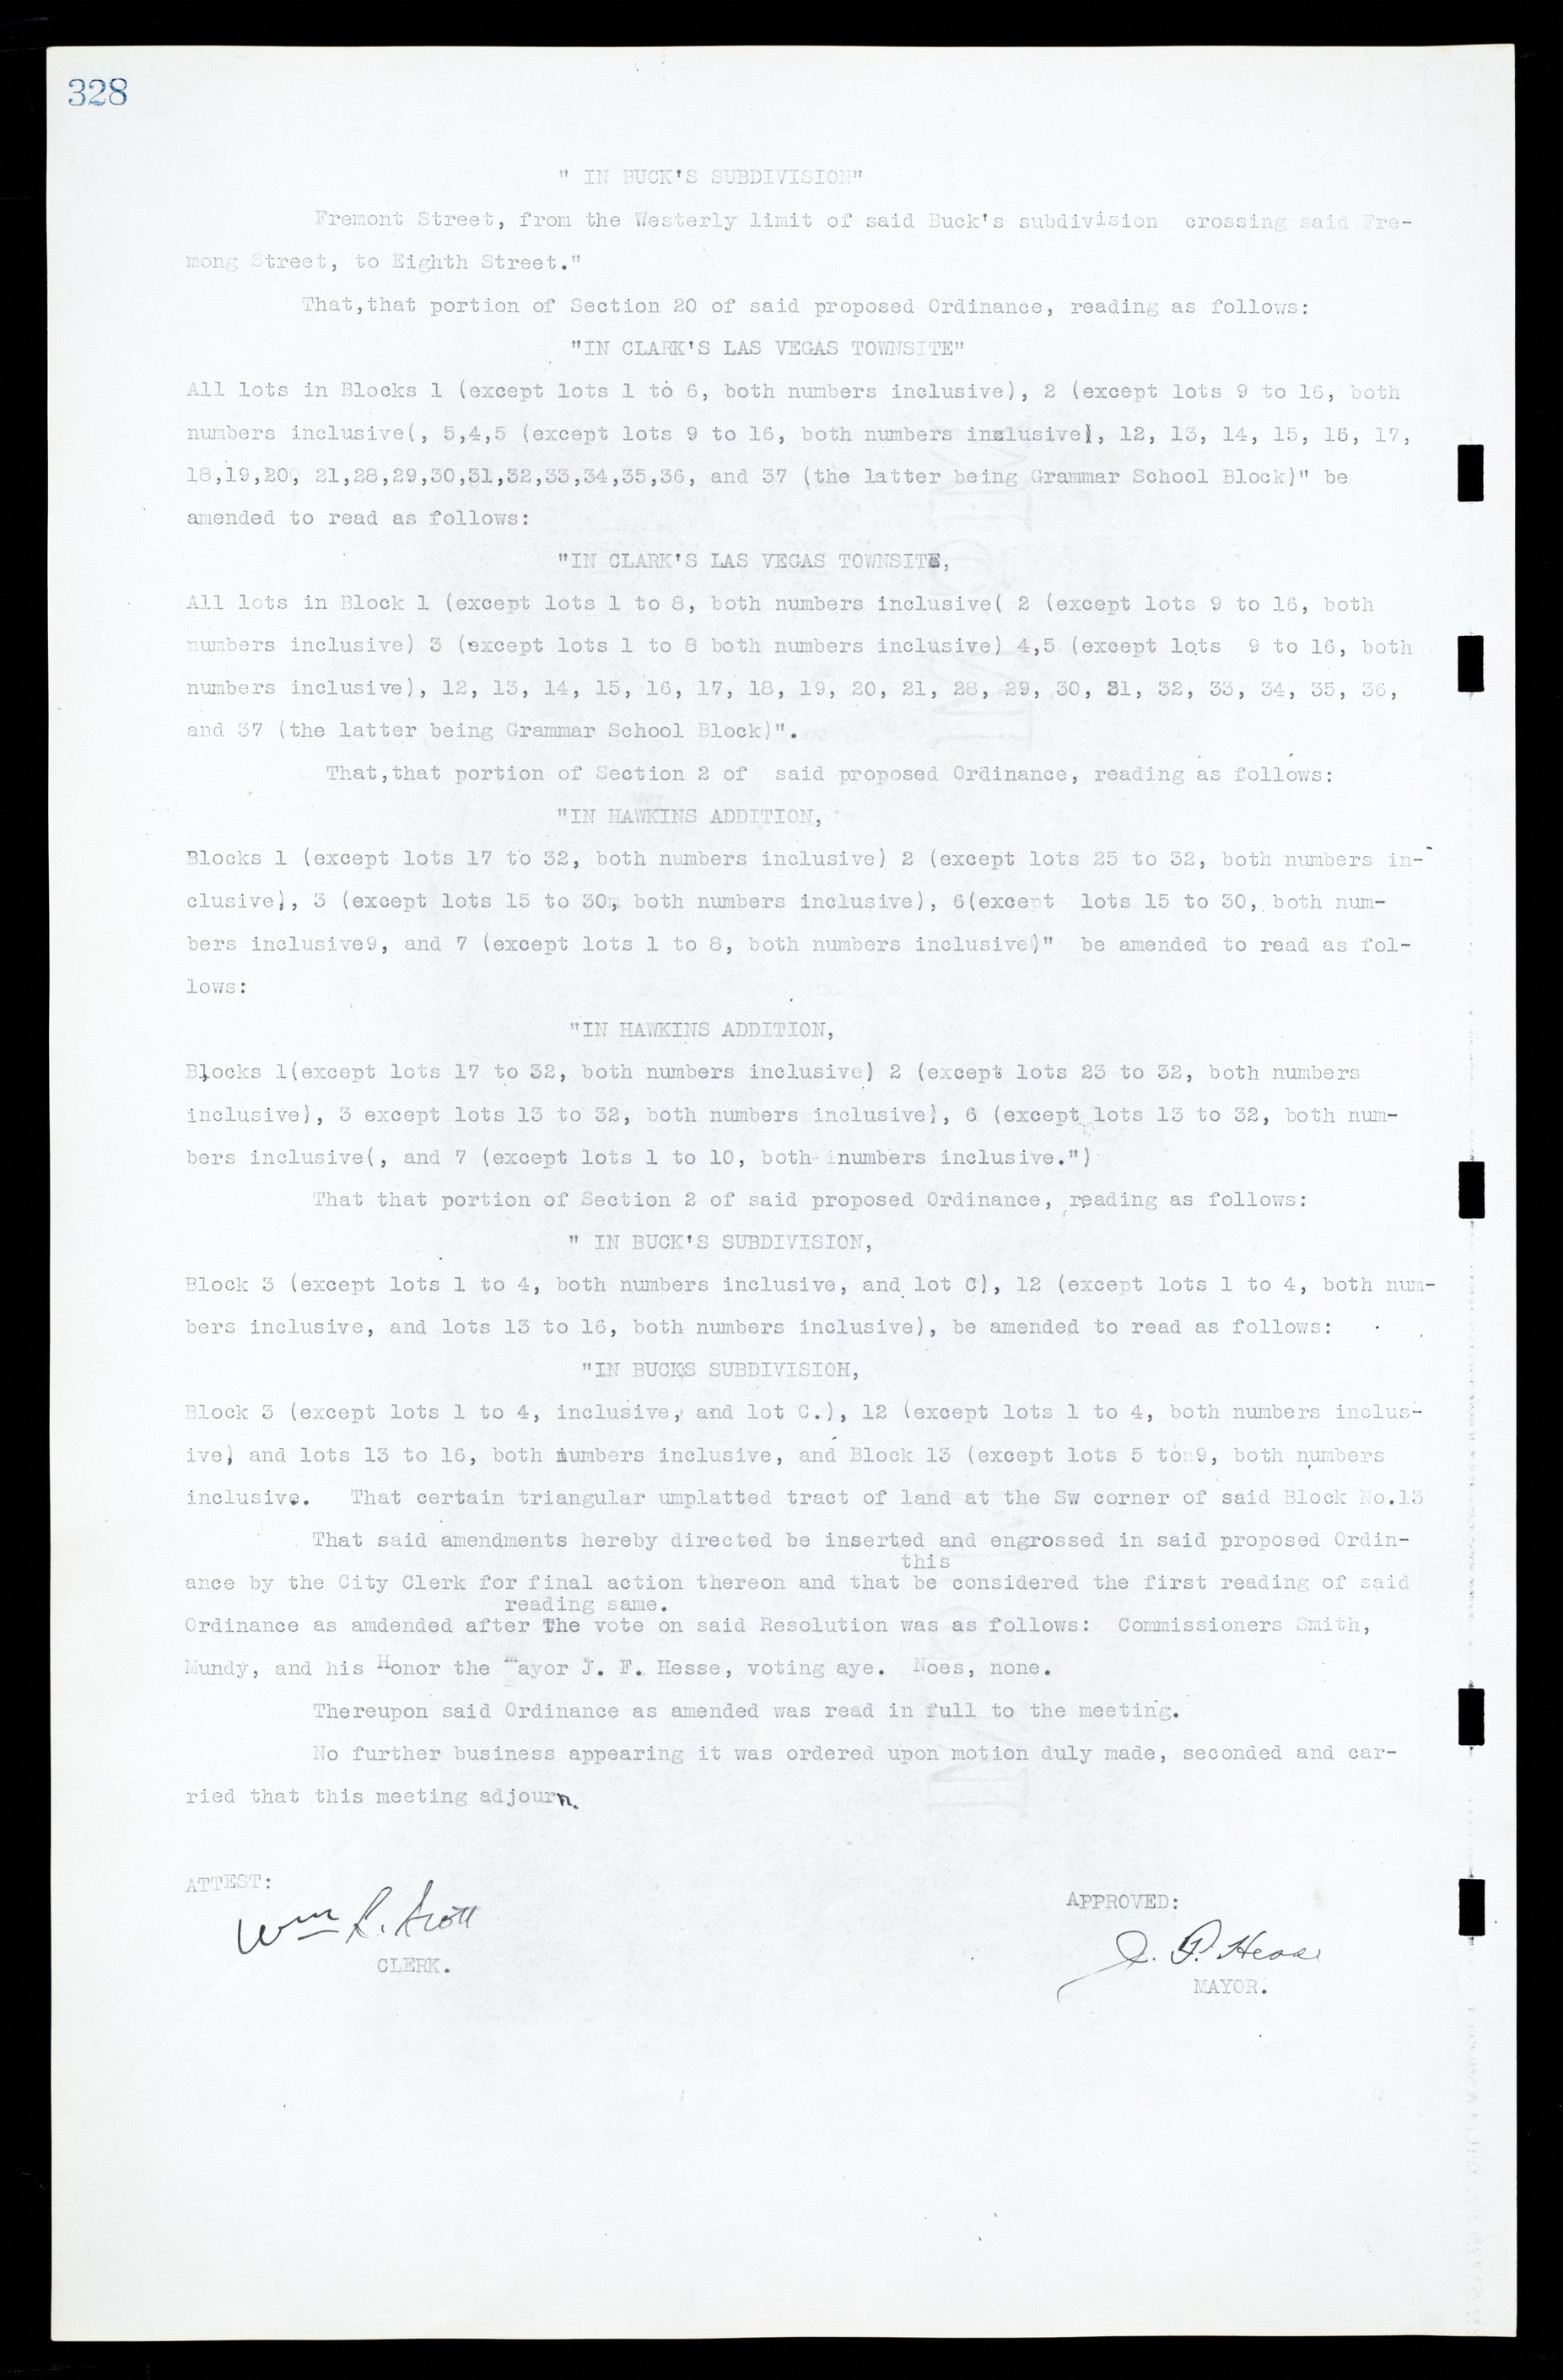 Las Vegas City Commission Minutes, March 1, 1922 to May 10, 1929, lvc000002-337